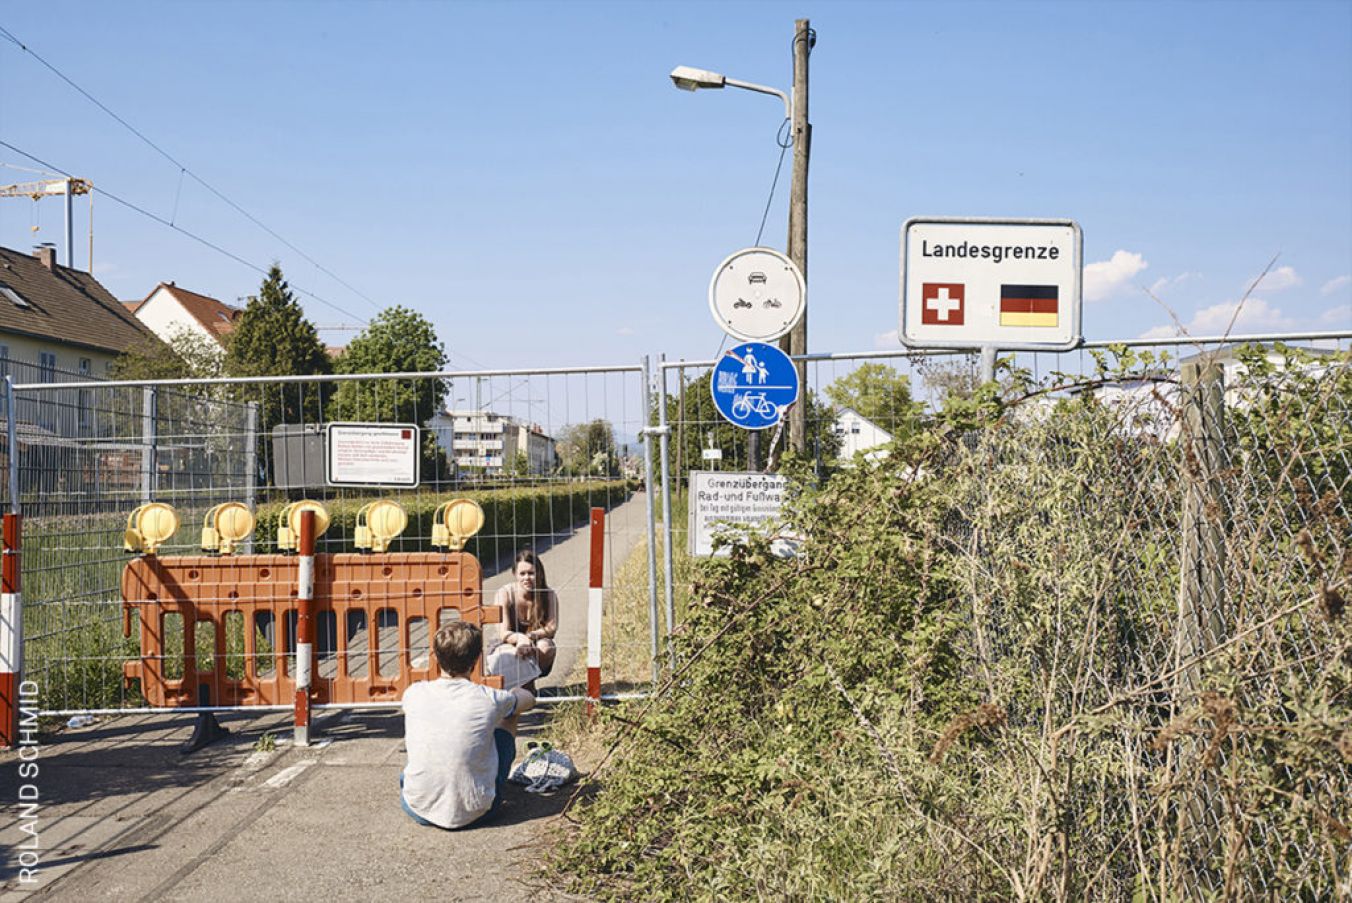 Switzerland Closed Its Borders For The First Time Since The Second World War From March To June 2020, Due To The Covid-19 Pandemic. In Towns Like Riehen And Kreuzlingen, Citizens Had Barely Noticed The Borders With Germany For Decades. These Barriers Became Meeting Places Those No Longer Allowed To Be Together. Photo: Roland Schmid, Switzerland.